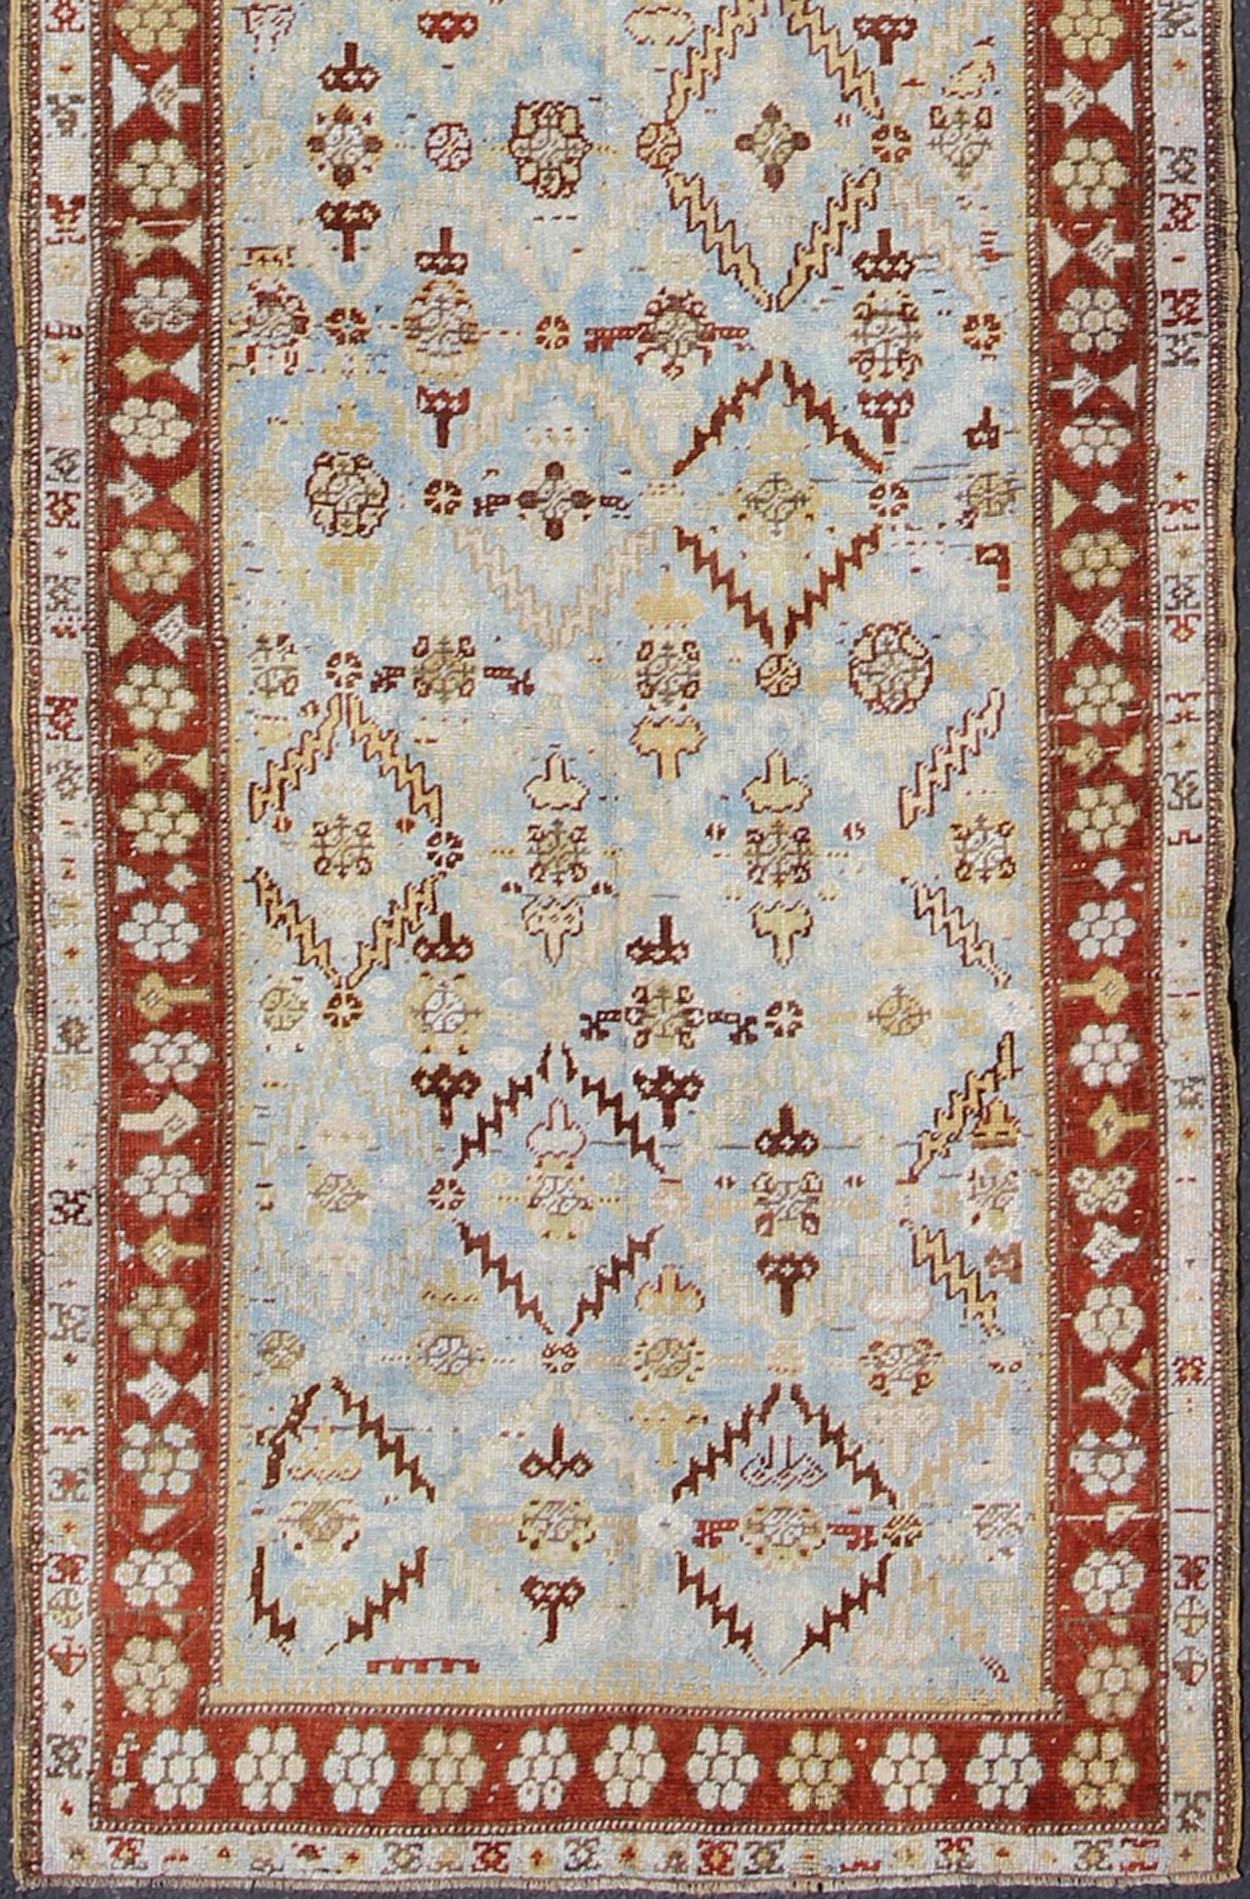 All-over design antique Persian Malayer runner with geometrics in blue and red, rug ema-7546, country of origin / type: Iran / Mahal, circa 1910.

This antique Persian Malayer runner, circa early 20th century, relies heavily on exquisite details as